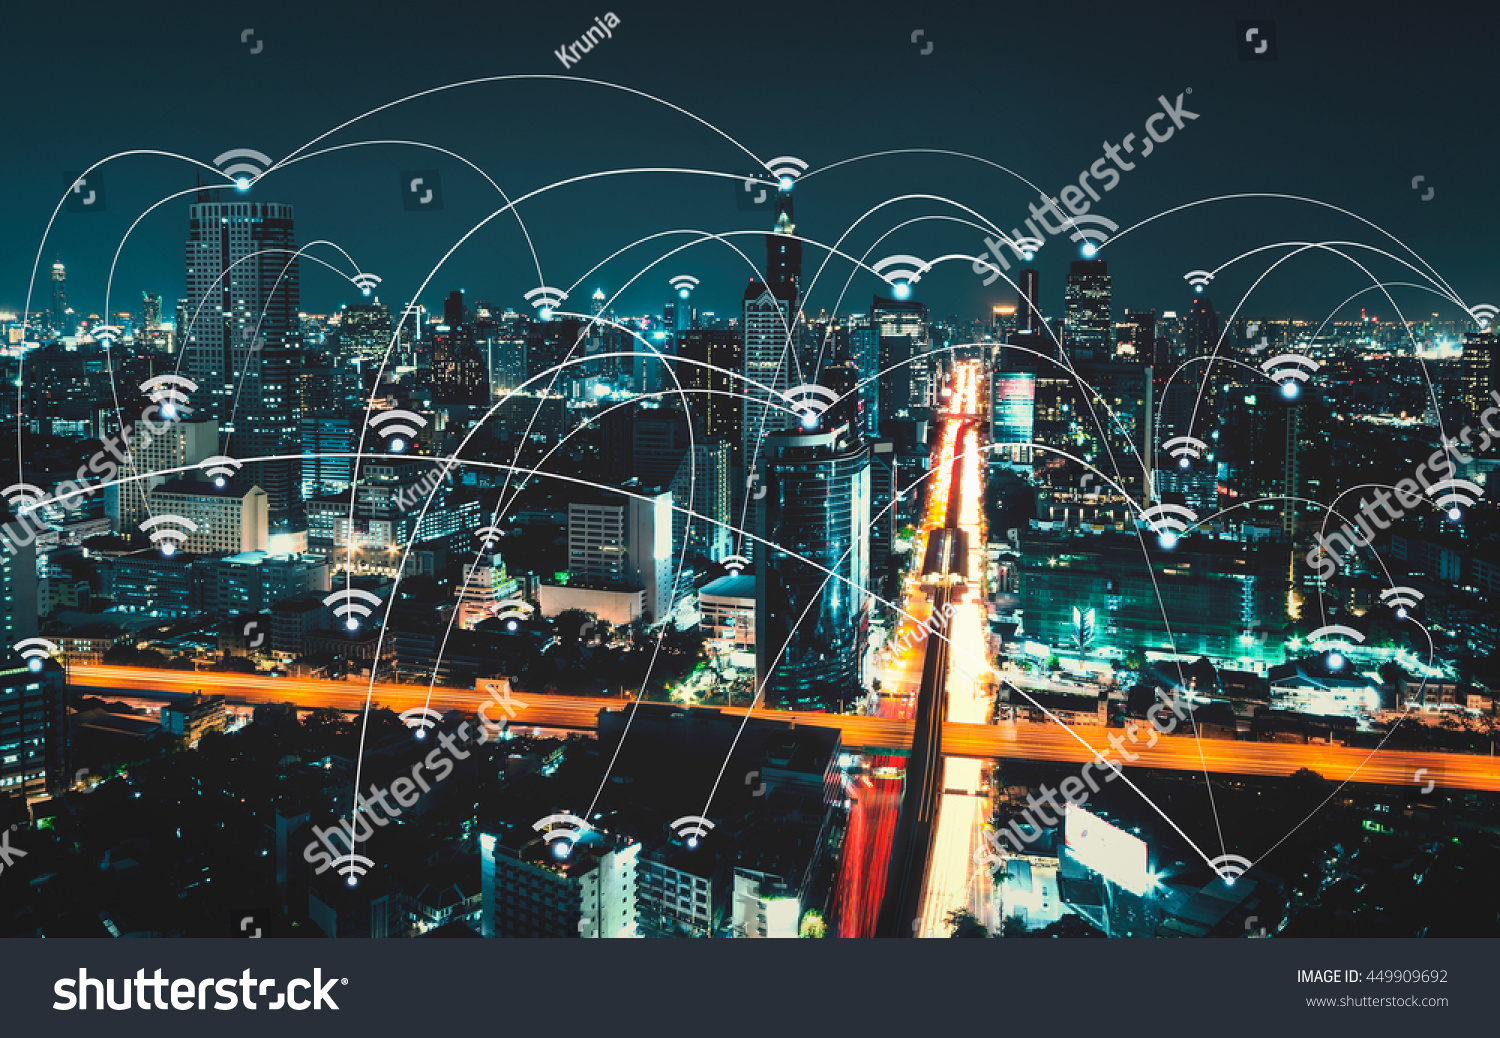 Wifi icon and city scape and network connection concept, Smart city and wireless communication network, abstract image visual, internet of things #449909692